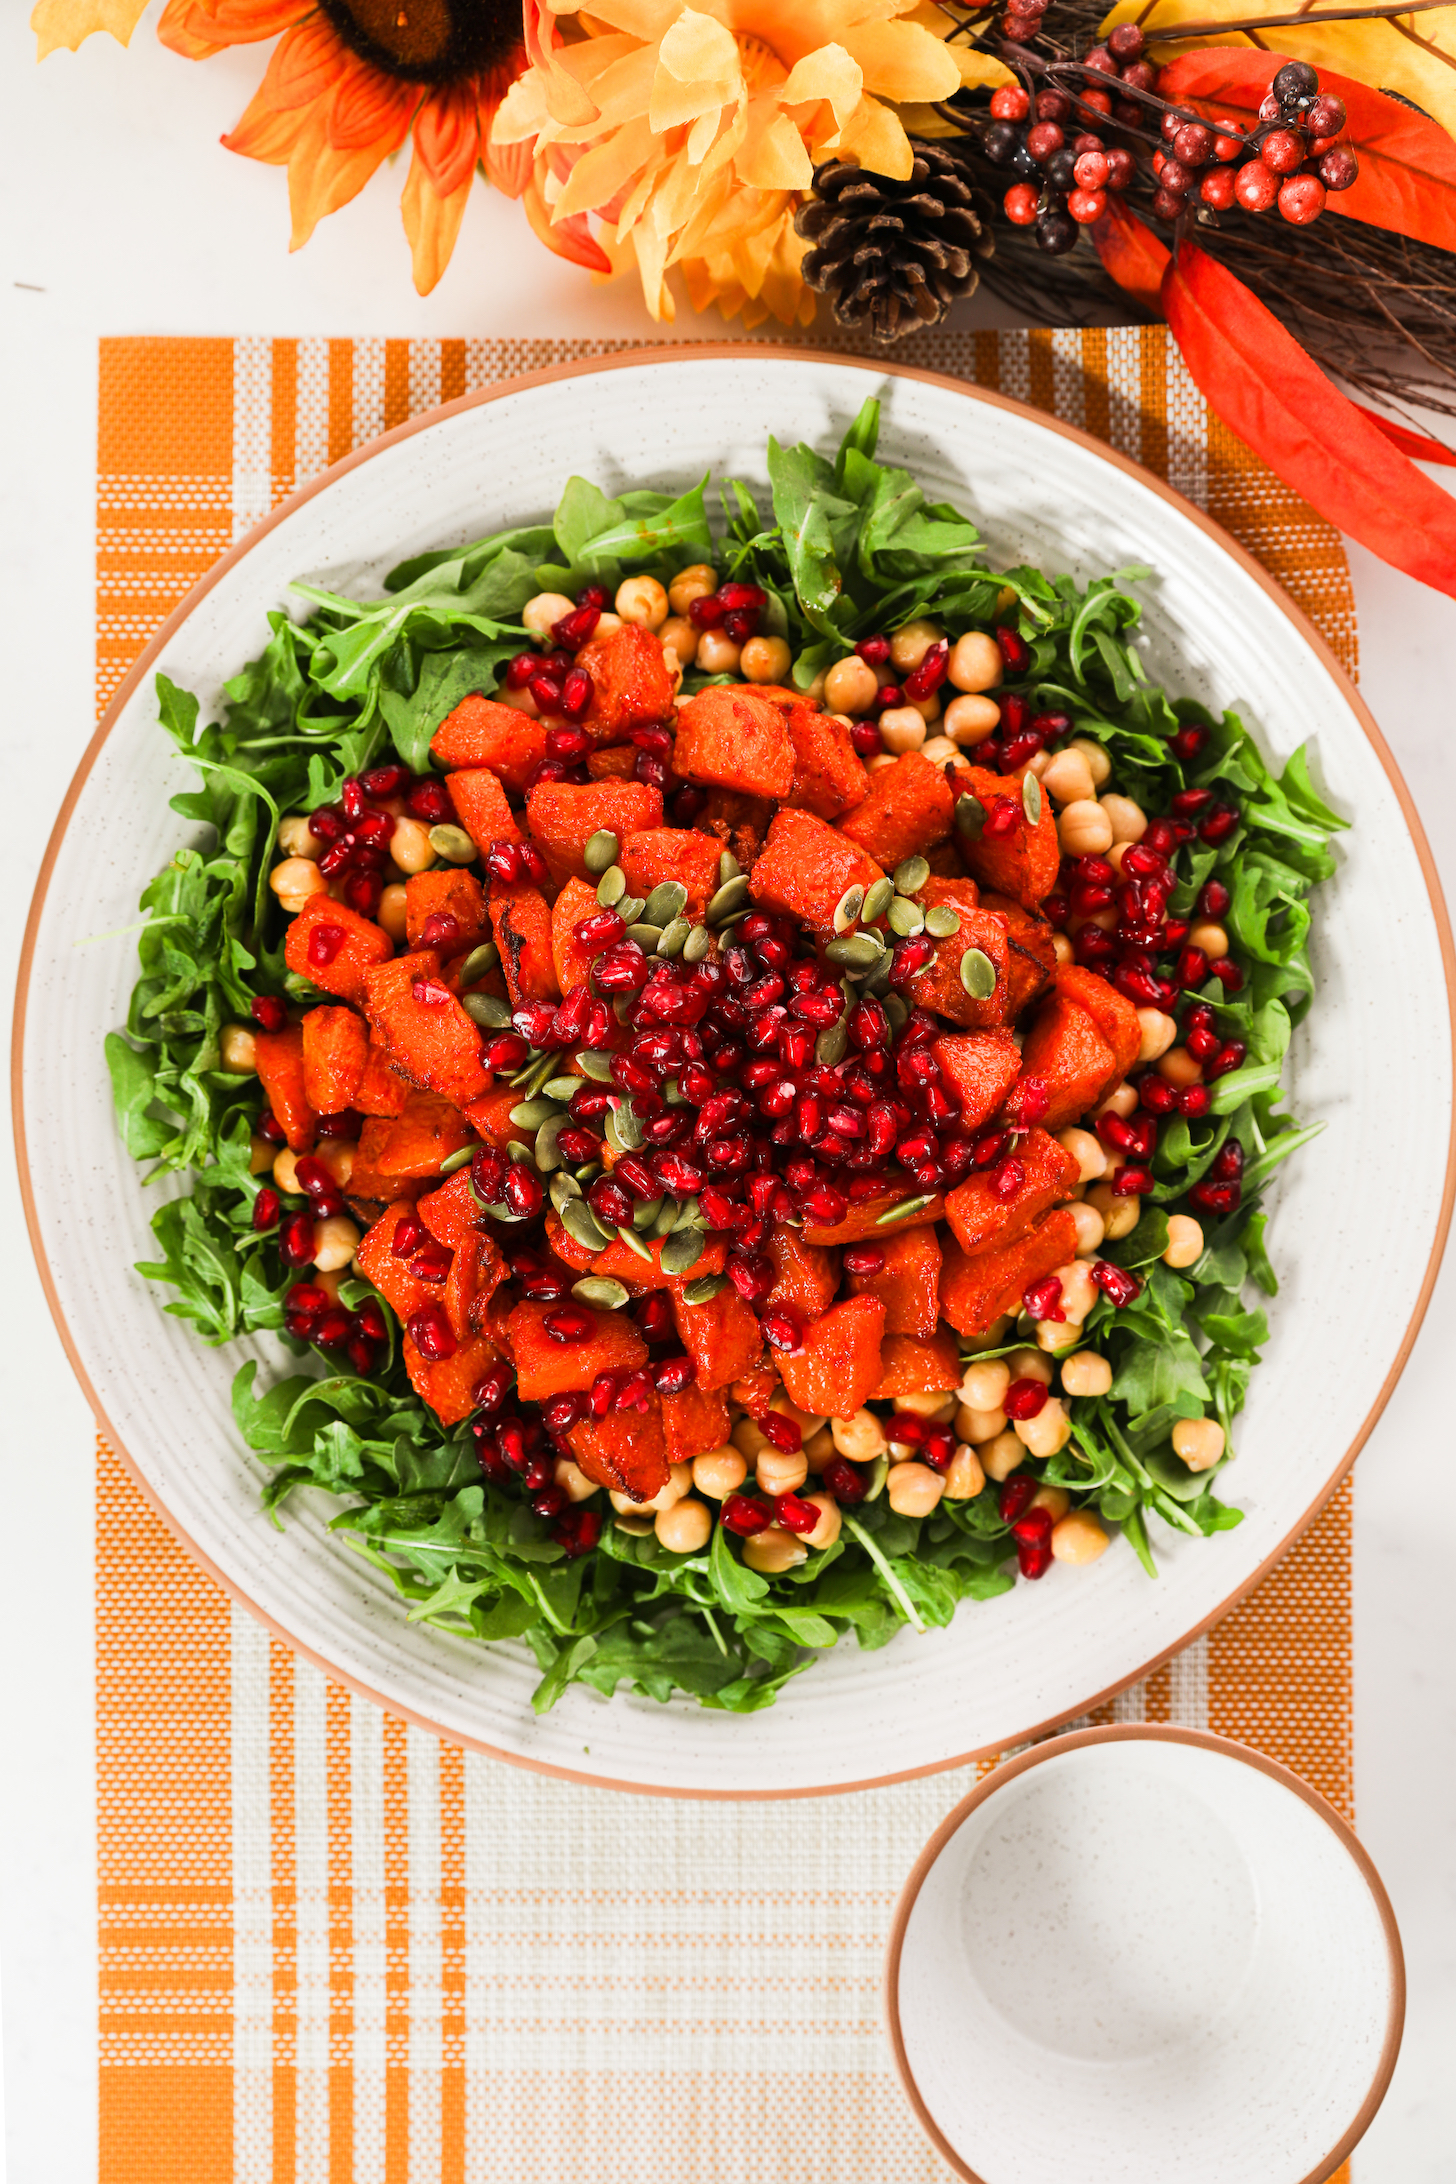 A large plate with a bed of arugula, chickpeas, roasted pumpkin pieces, pomegranate kernels and pumpkin seeds set on a placemat with orange and yellow flowers nearby.